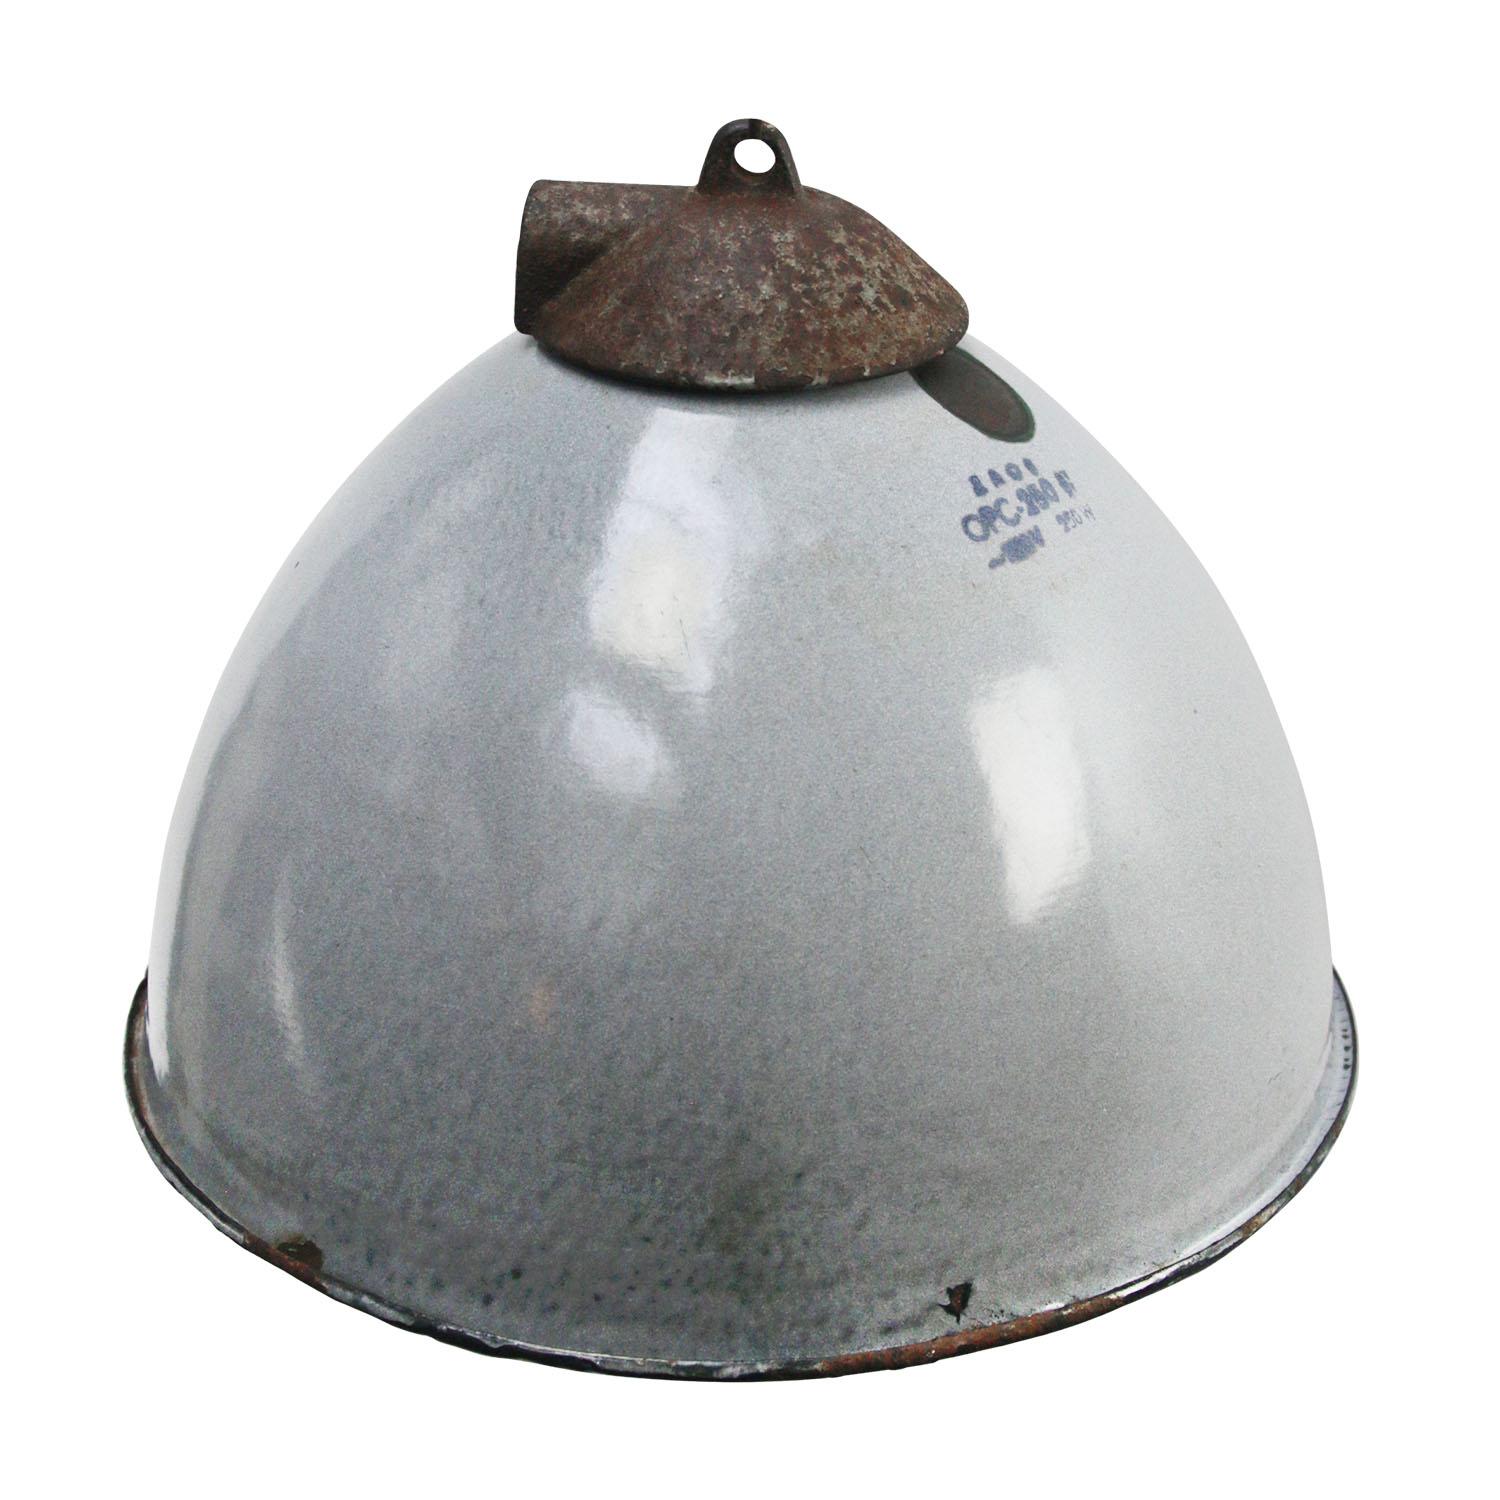 Grey enamel factory pendant.
White enamel white interior cast iron top.

Weight: 1.9 kg / 4.2 lb

Priced per individual item. All lamps have been made suitable by international standards for incandescent light bulbs, energy-efficient and LED